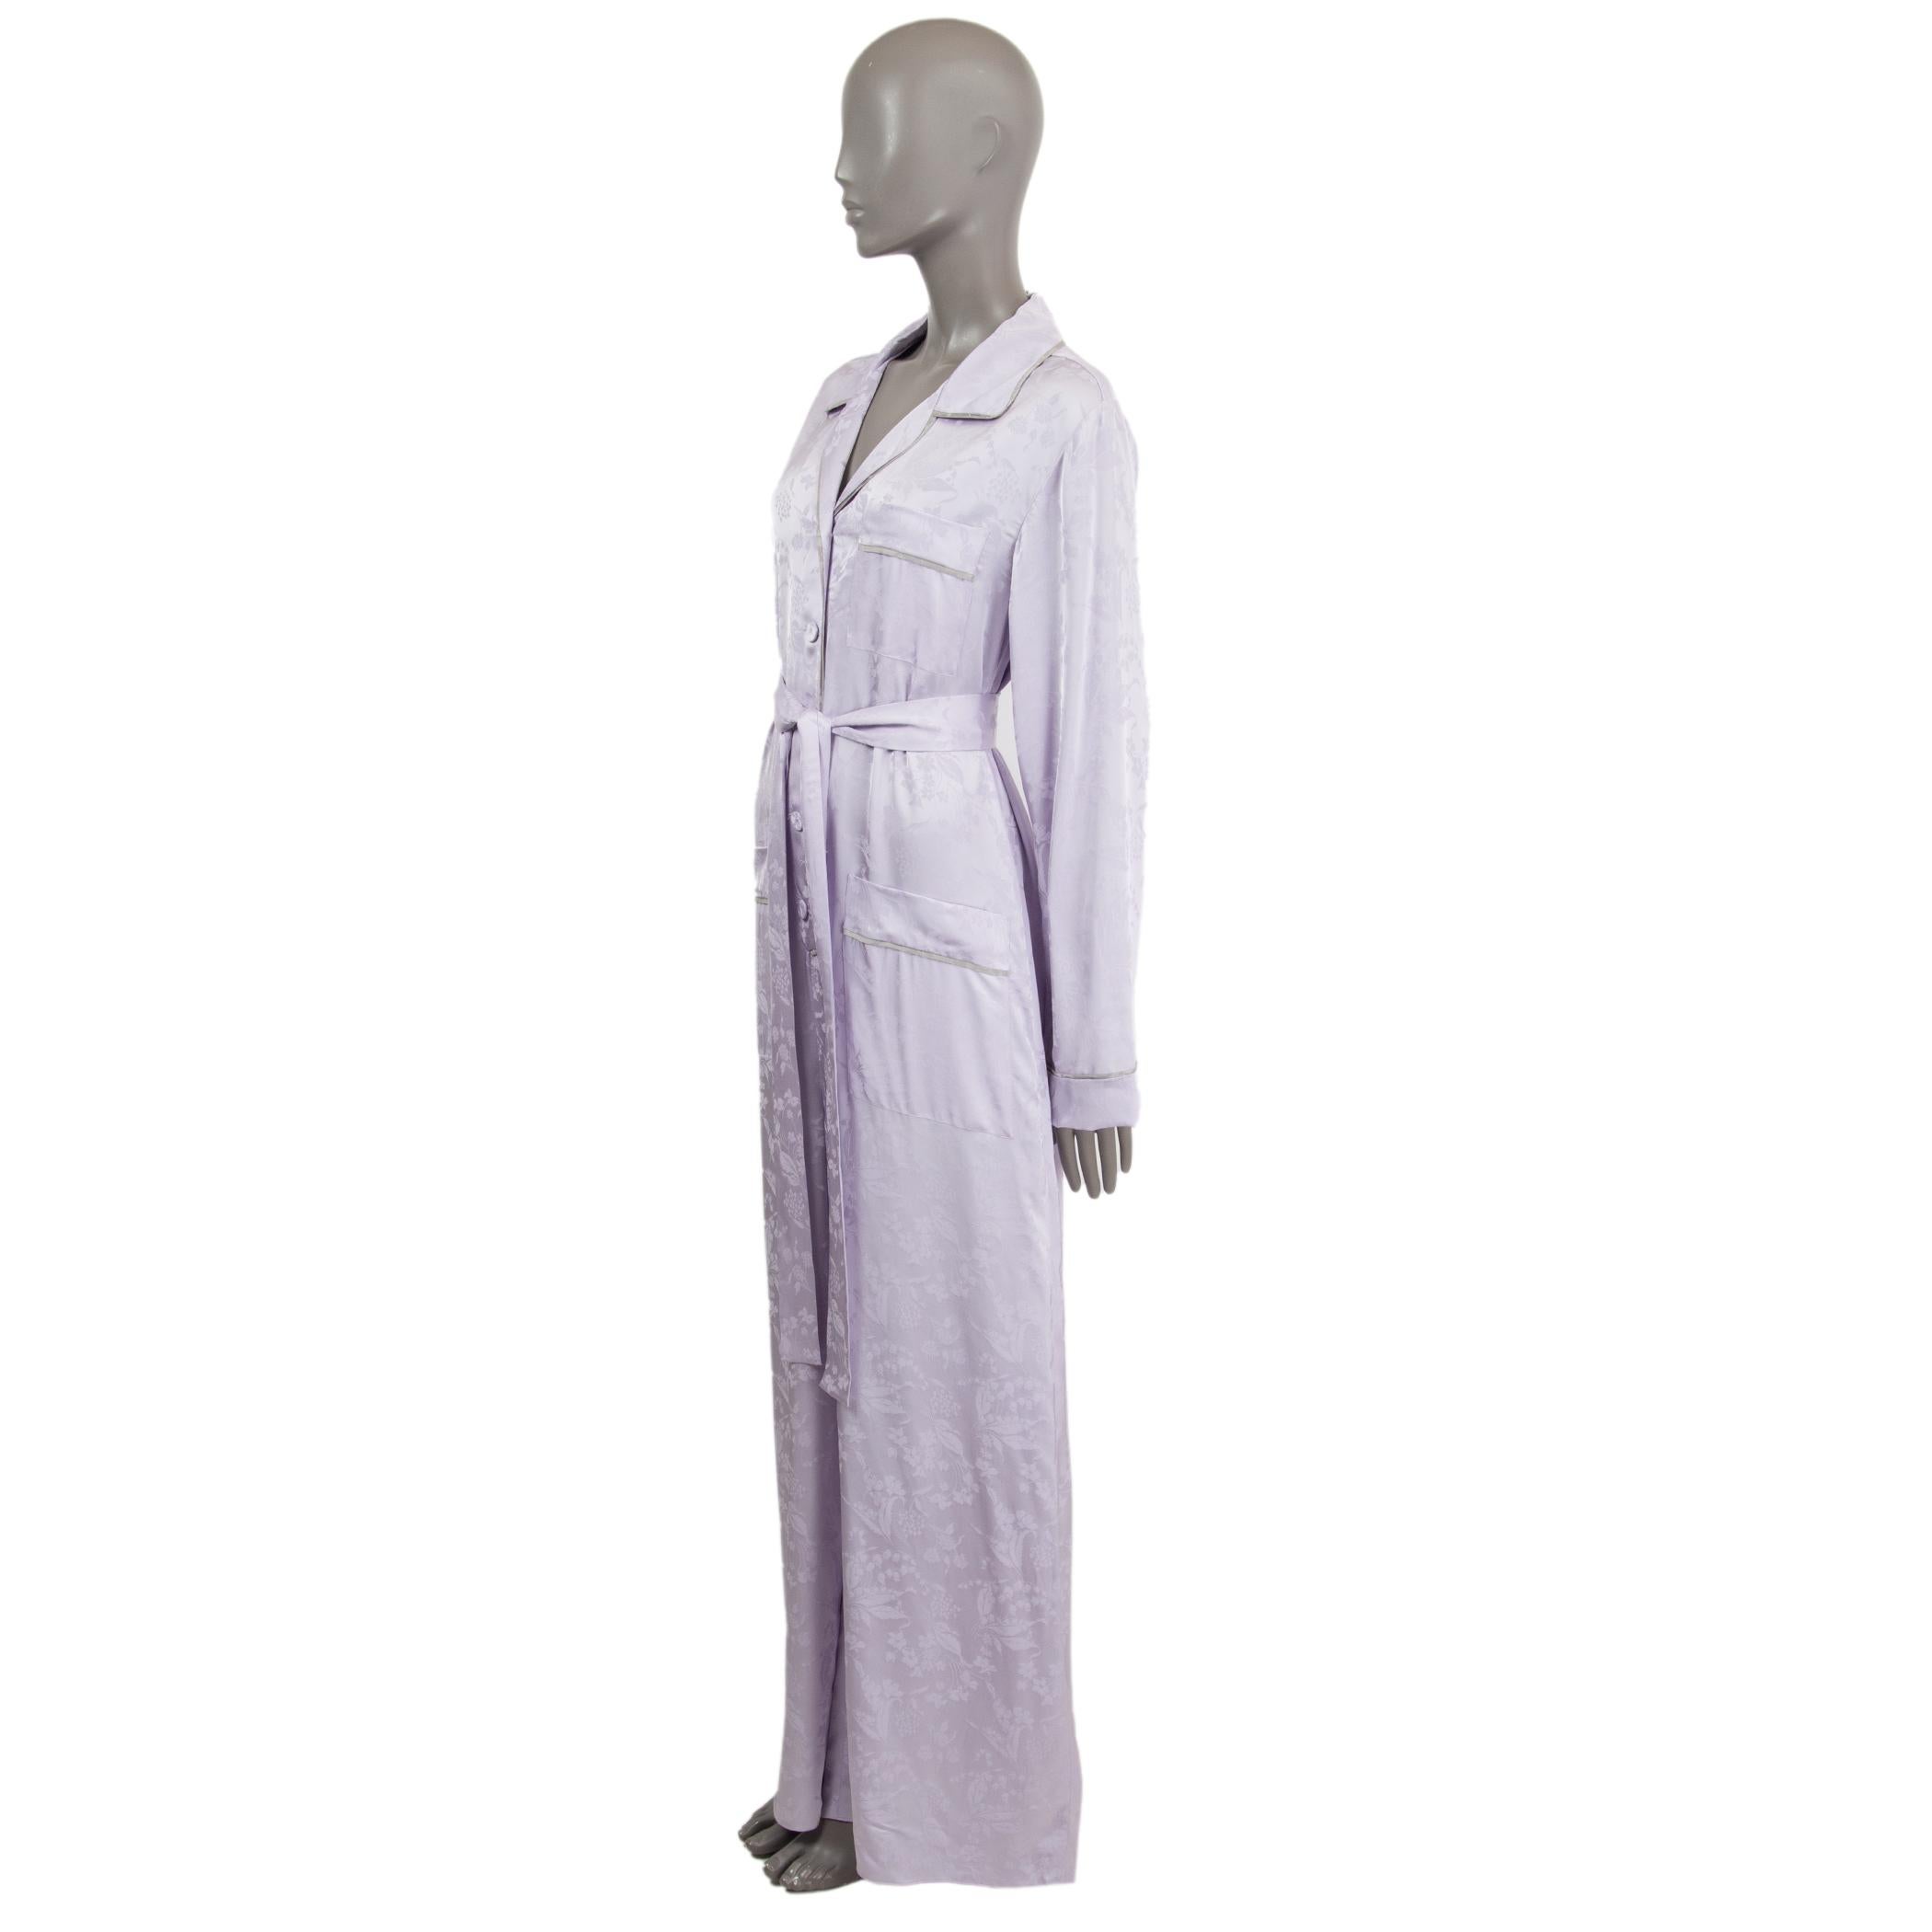 100% authentic Bottega Veneta fluid silk-blend floral jacquard jumpsuit in lilac viscose (68%) and silk (32%) edged with silver grey silk piping. Classic pyjama-style collar and covered buttons fastening. Comes with a removable self-tie belt, single